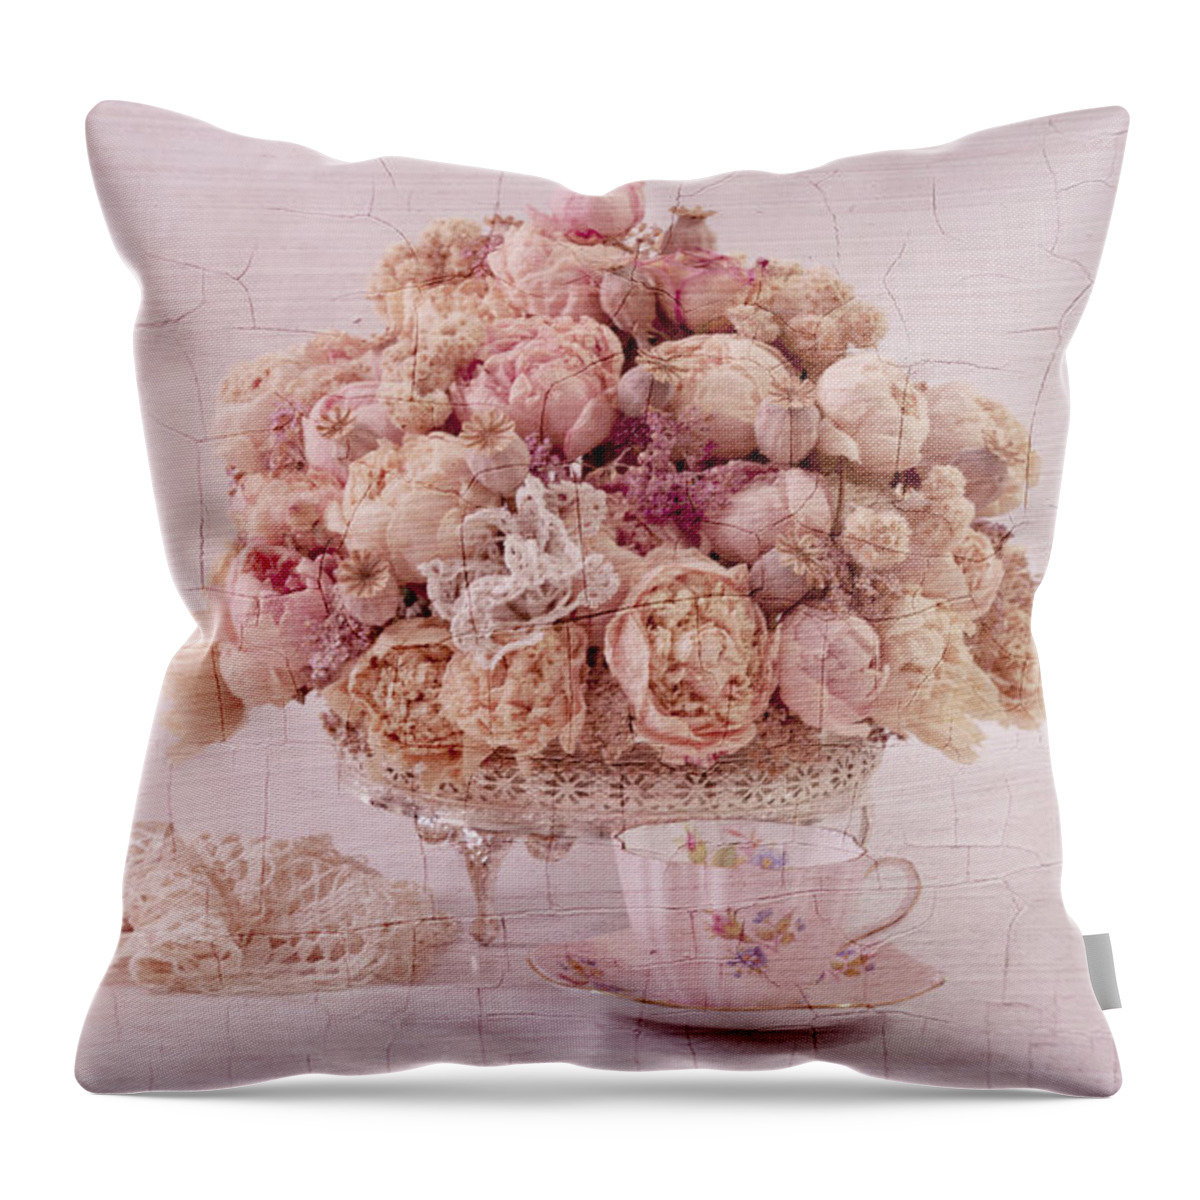 Dried Peonies Throw Pillow featuring the photograph Dried Peony Still Life by Sandra Foster